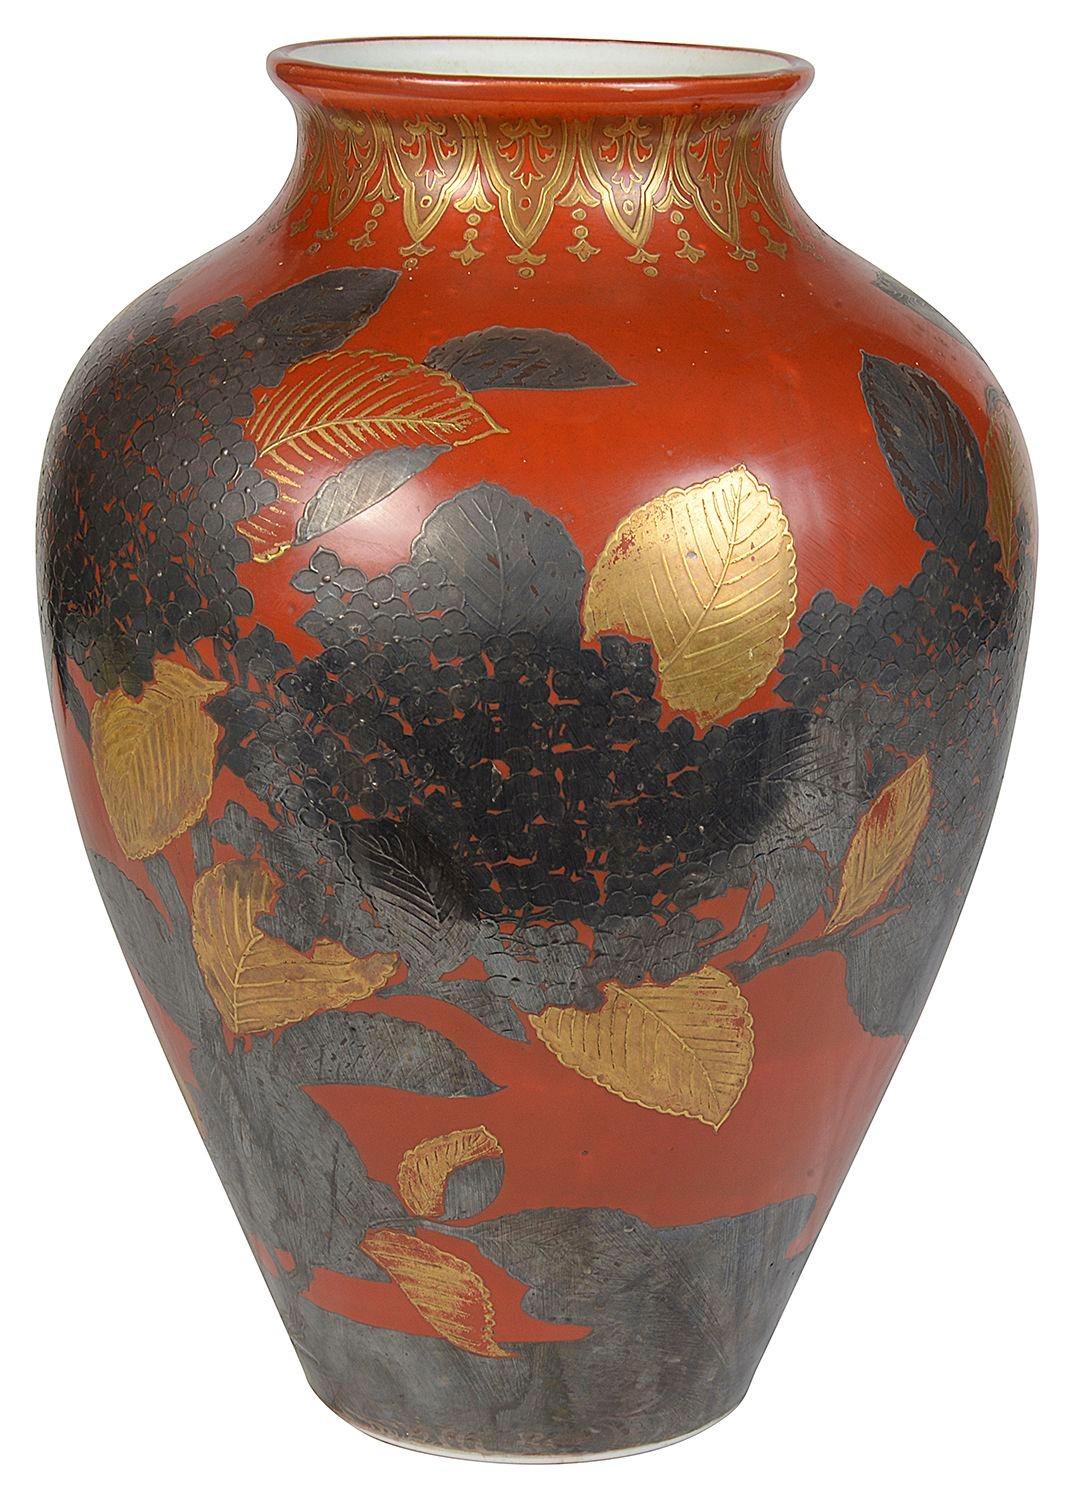 A very decoration and striking Japanese Meiji period (1868-1912) porcelain vase with an overlay lacquer decoration with bronzed and gilded leaves and foliage on an orange ground.
We can convert the vase to a lamp if required.
Signed to the base.
 
